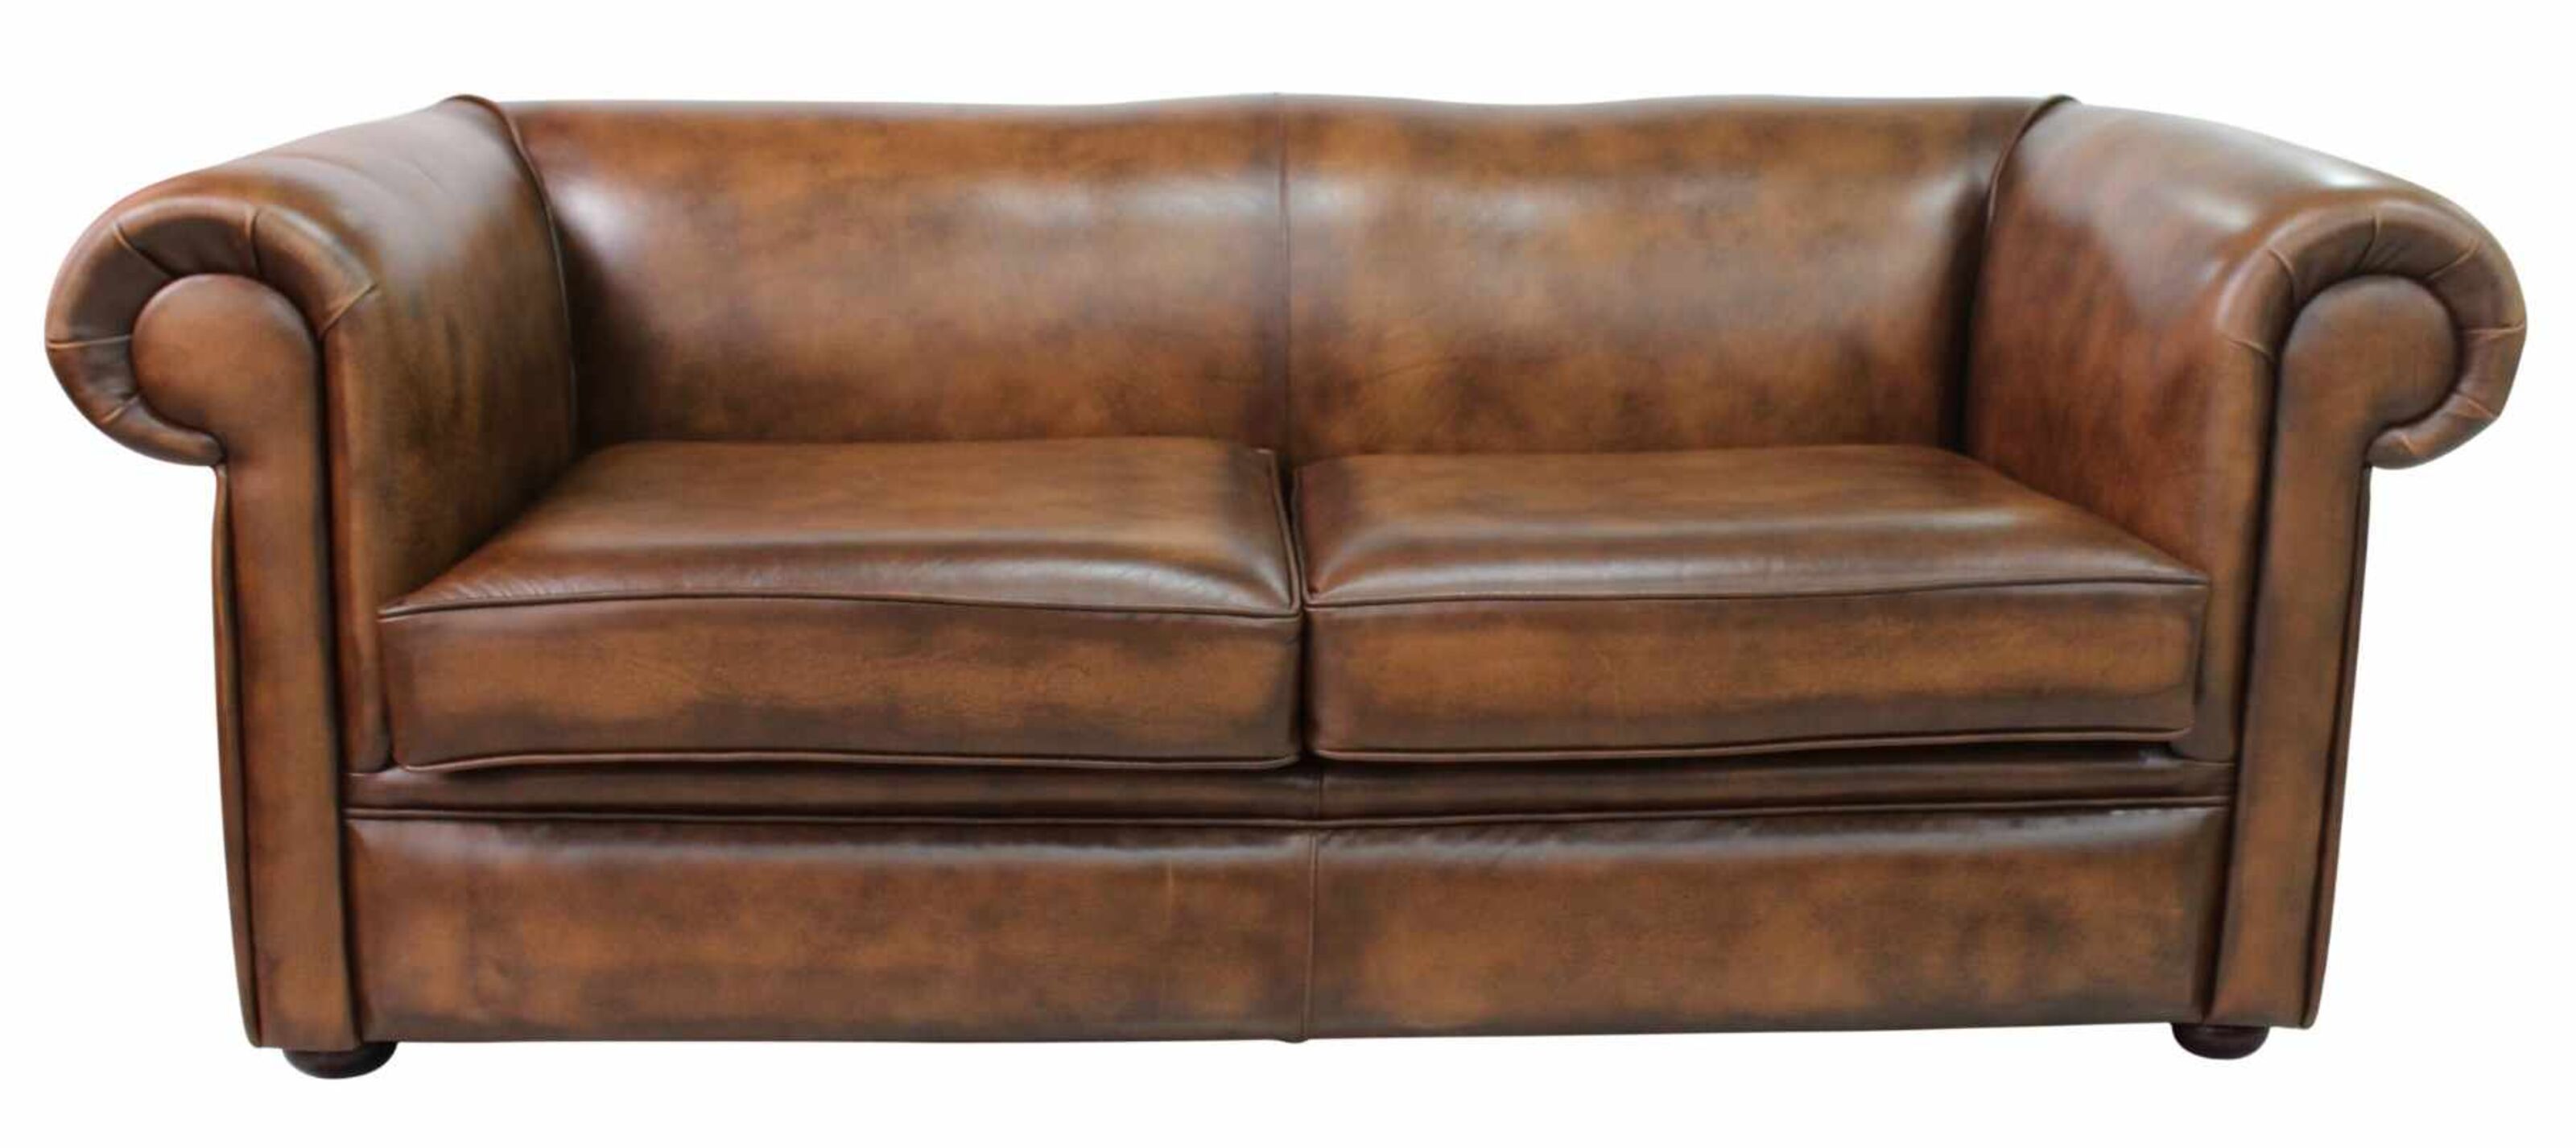 Assessing Chesterfield Sofas Quality, Comfort, and Style  %Post Title